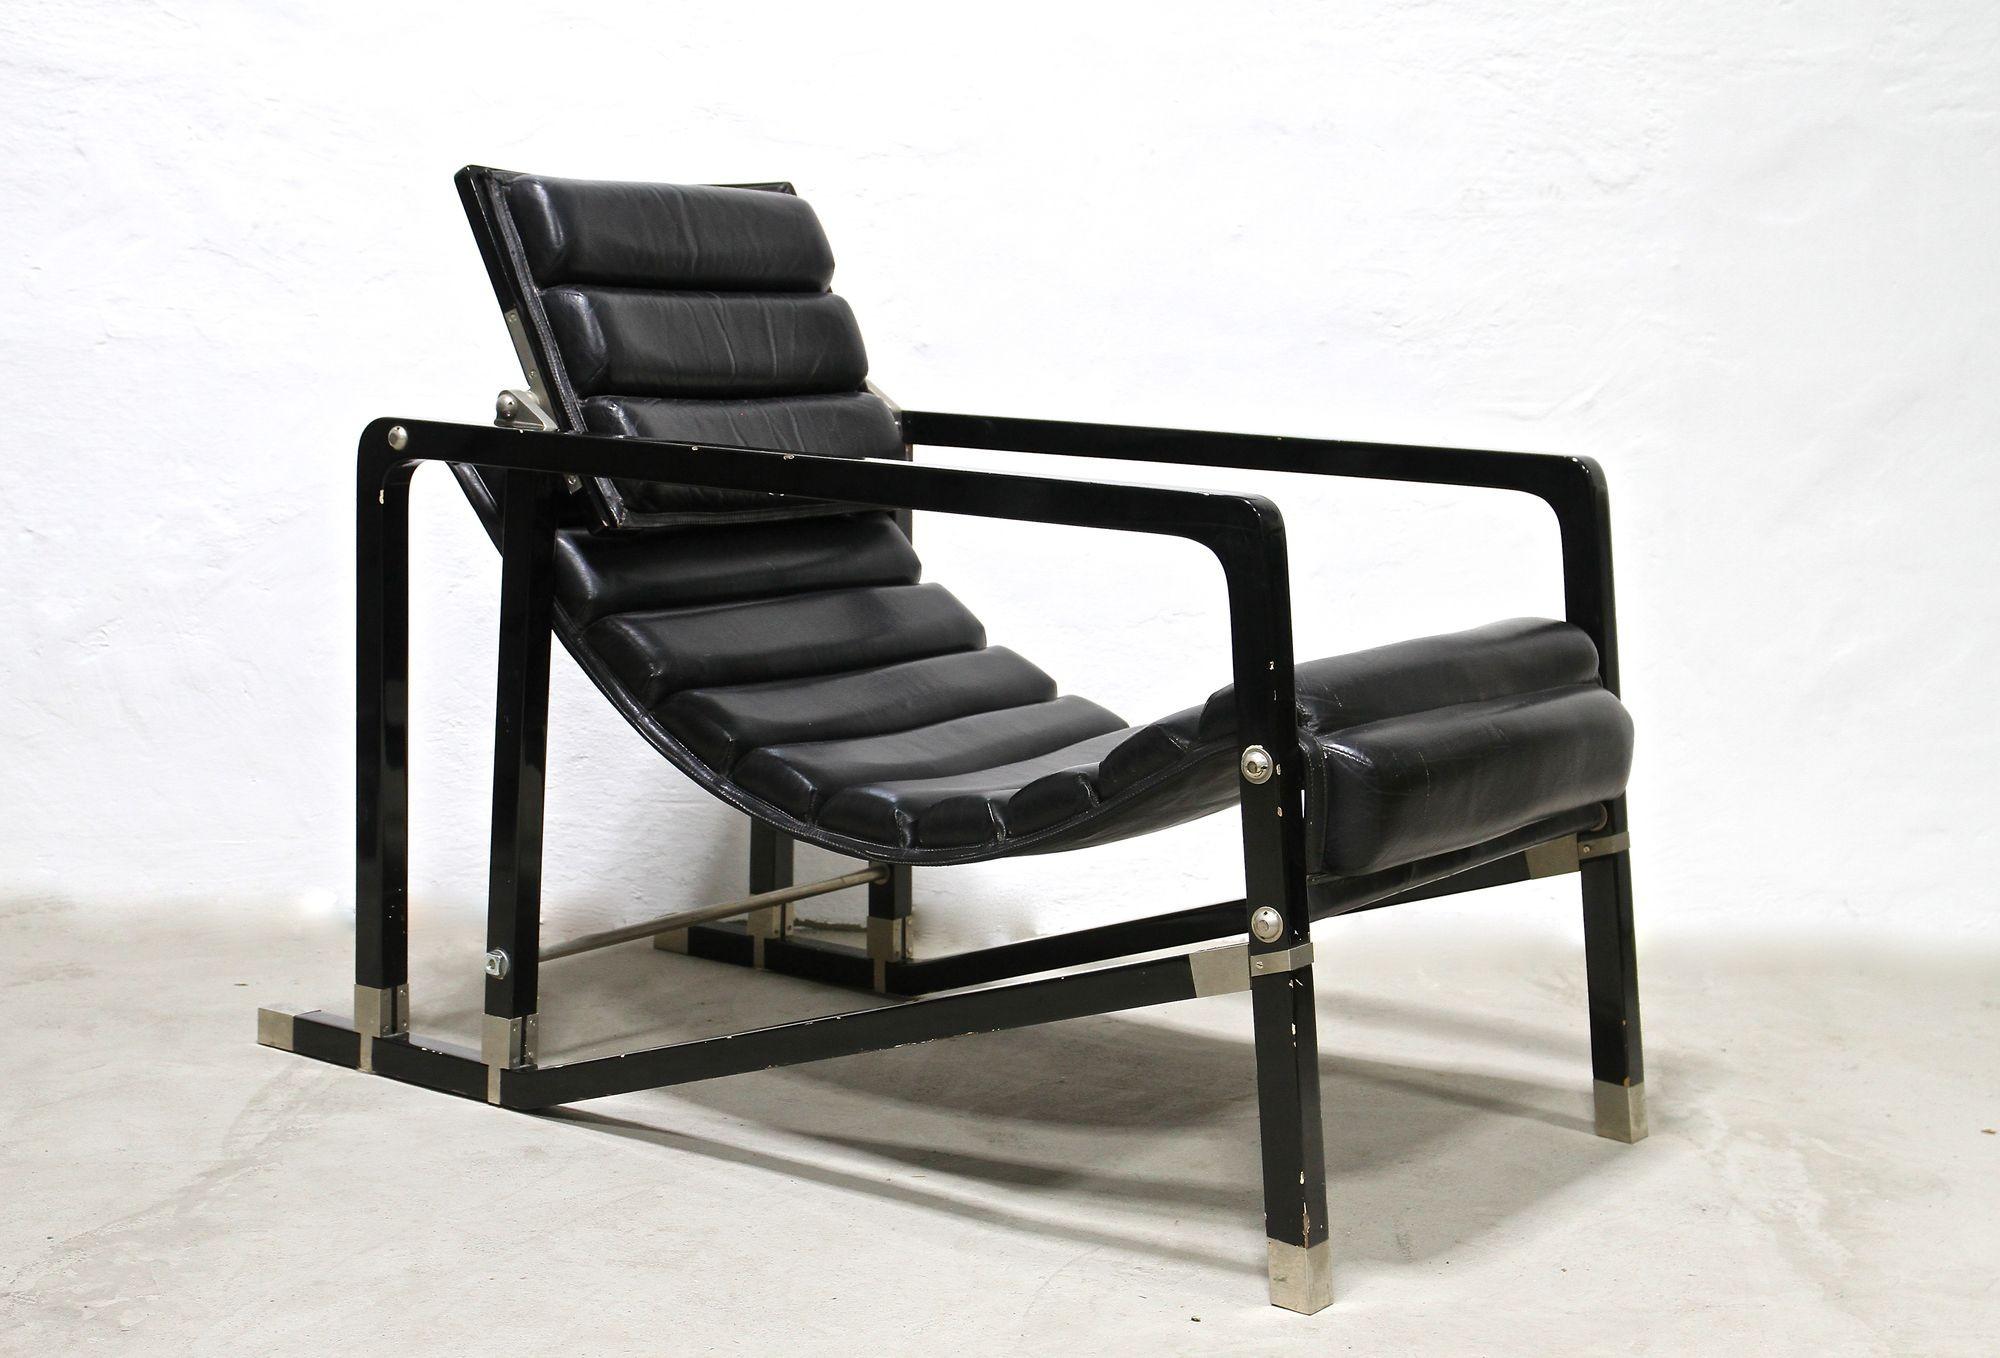 Transat Chair With Black Leather, Design Eileen Gray 1927, France ca. 1975 For Sale 9